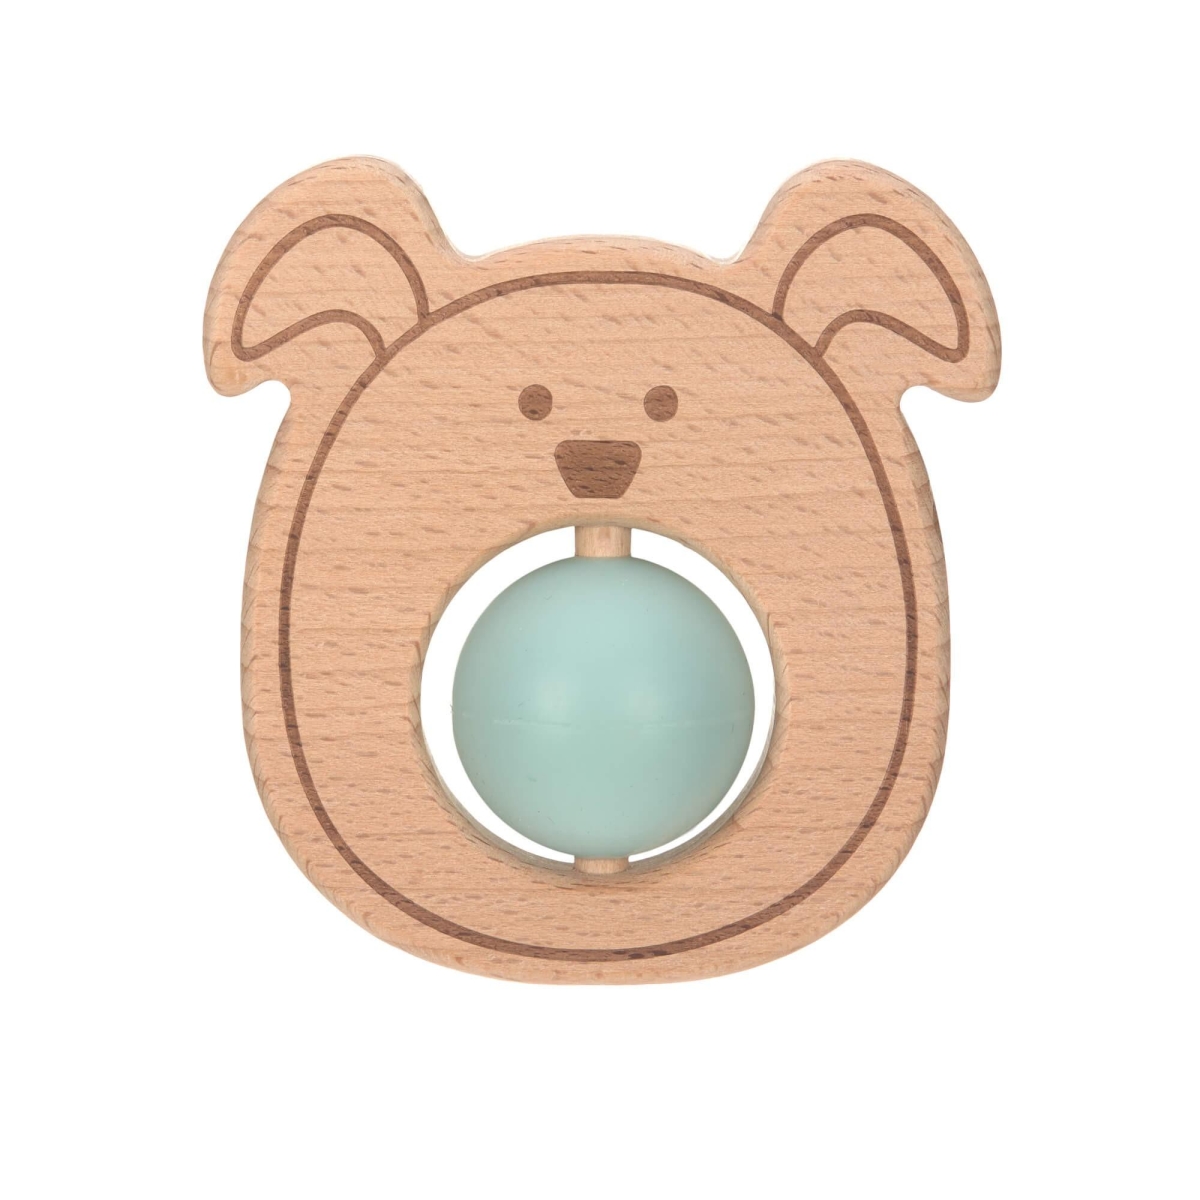 Teether "Ball" Wood/Silicone Little Chums Dog